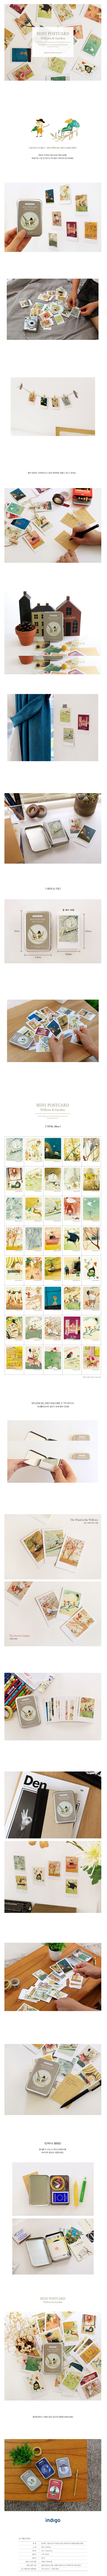 wind in the willows postcards [chun eun sil illustrations, chun eun sil korean illustrator, wind in the willows notecards]